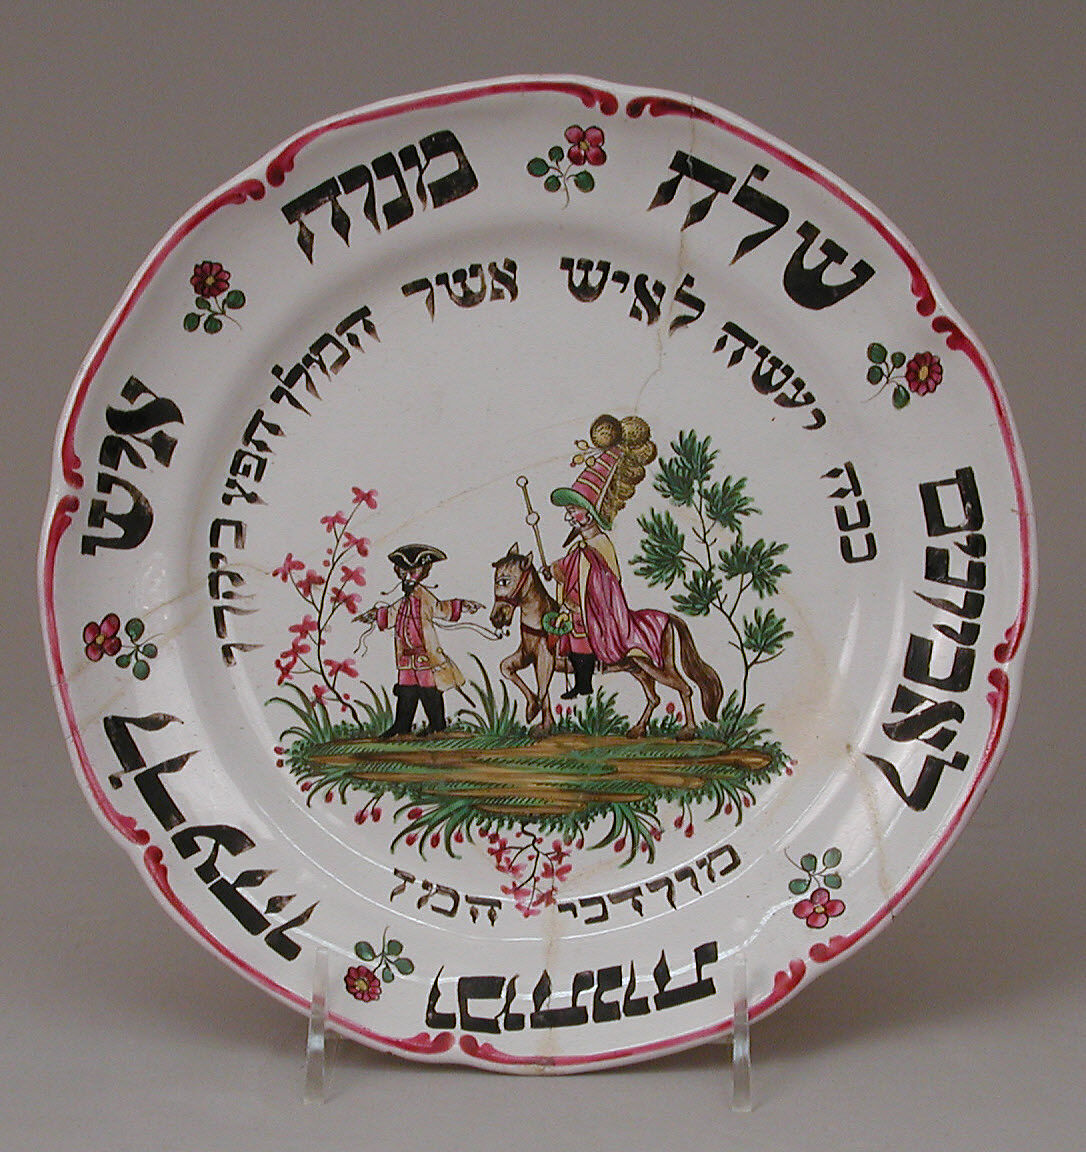 Festive Plate, Charles Loyal Factory, Tin-glazed earthenware, French, Lunéville 